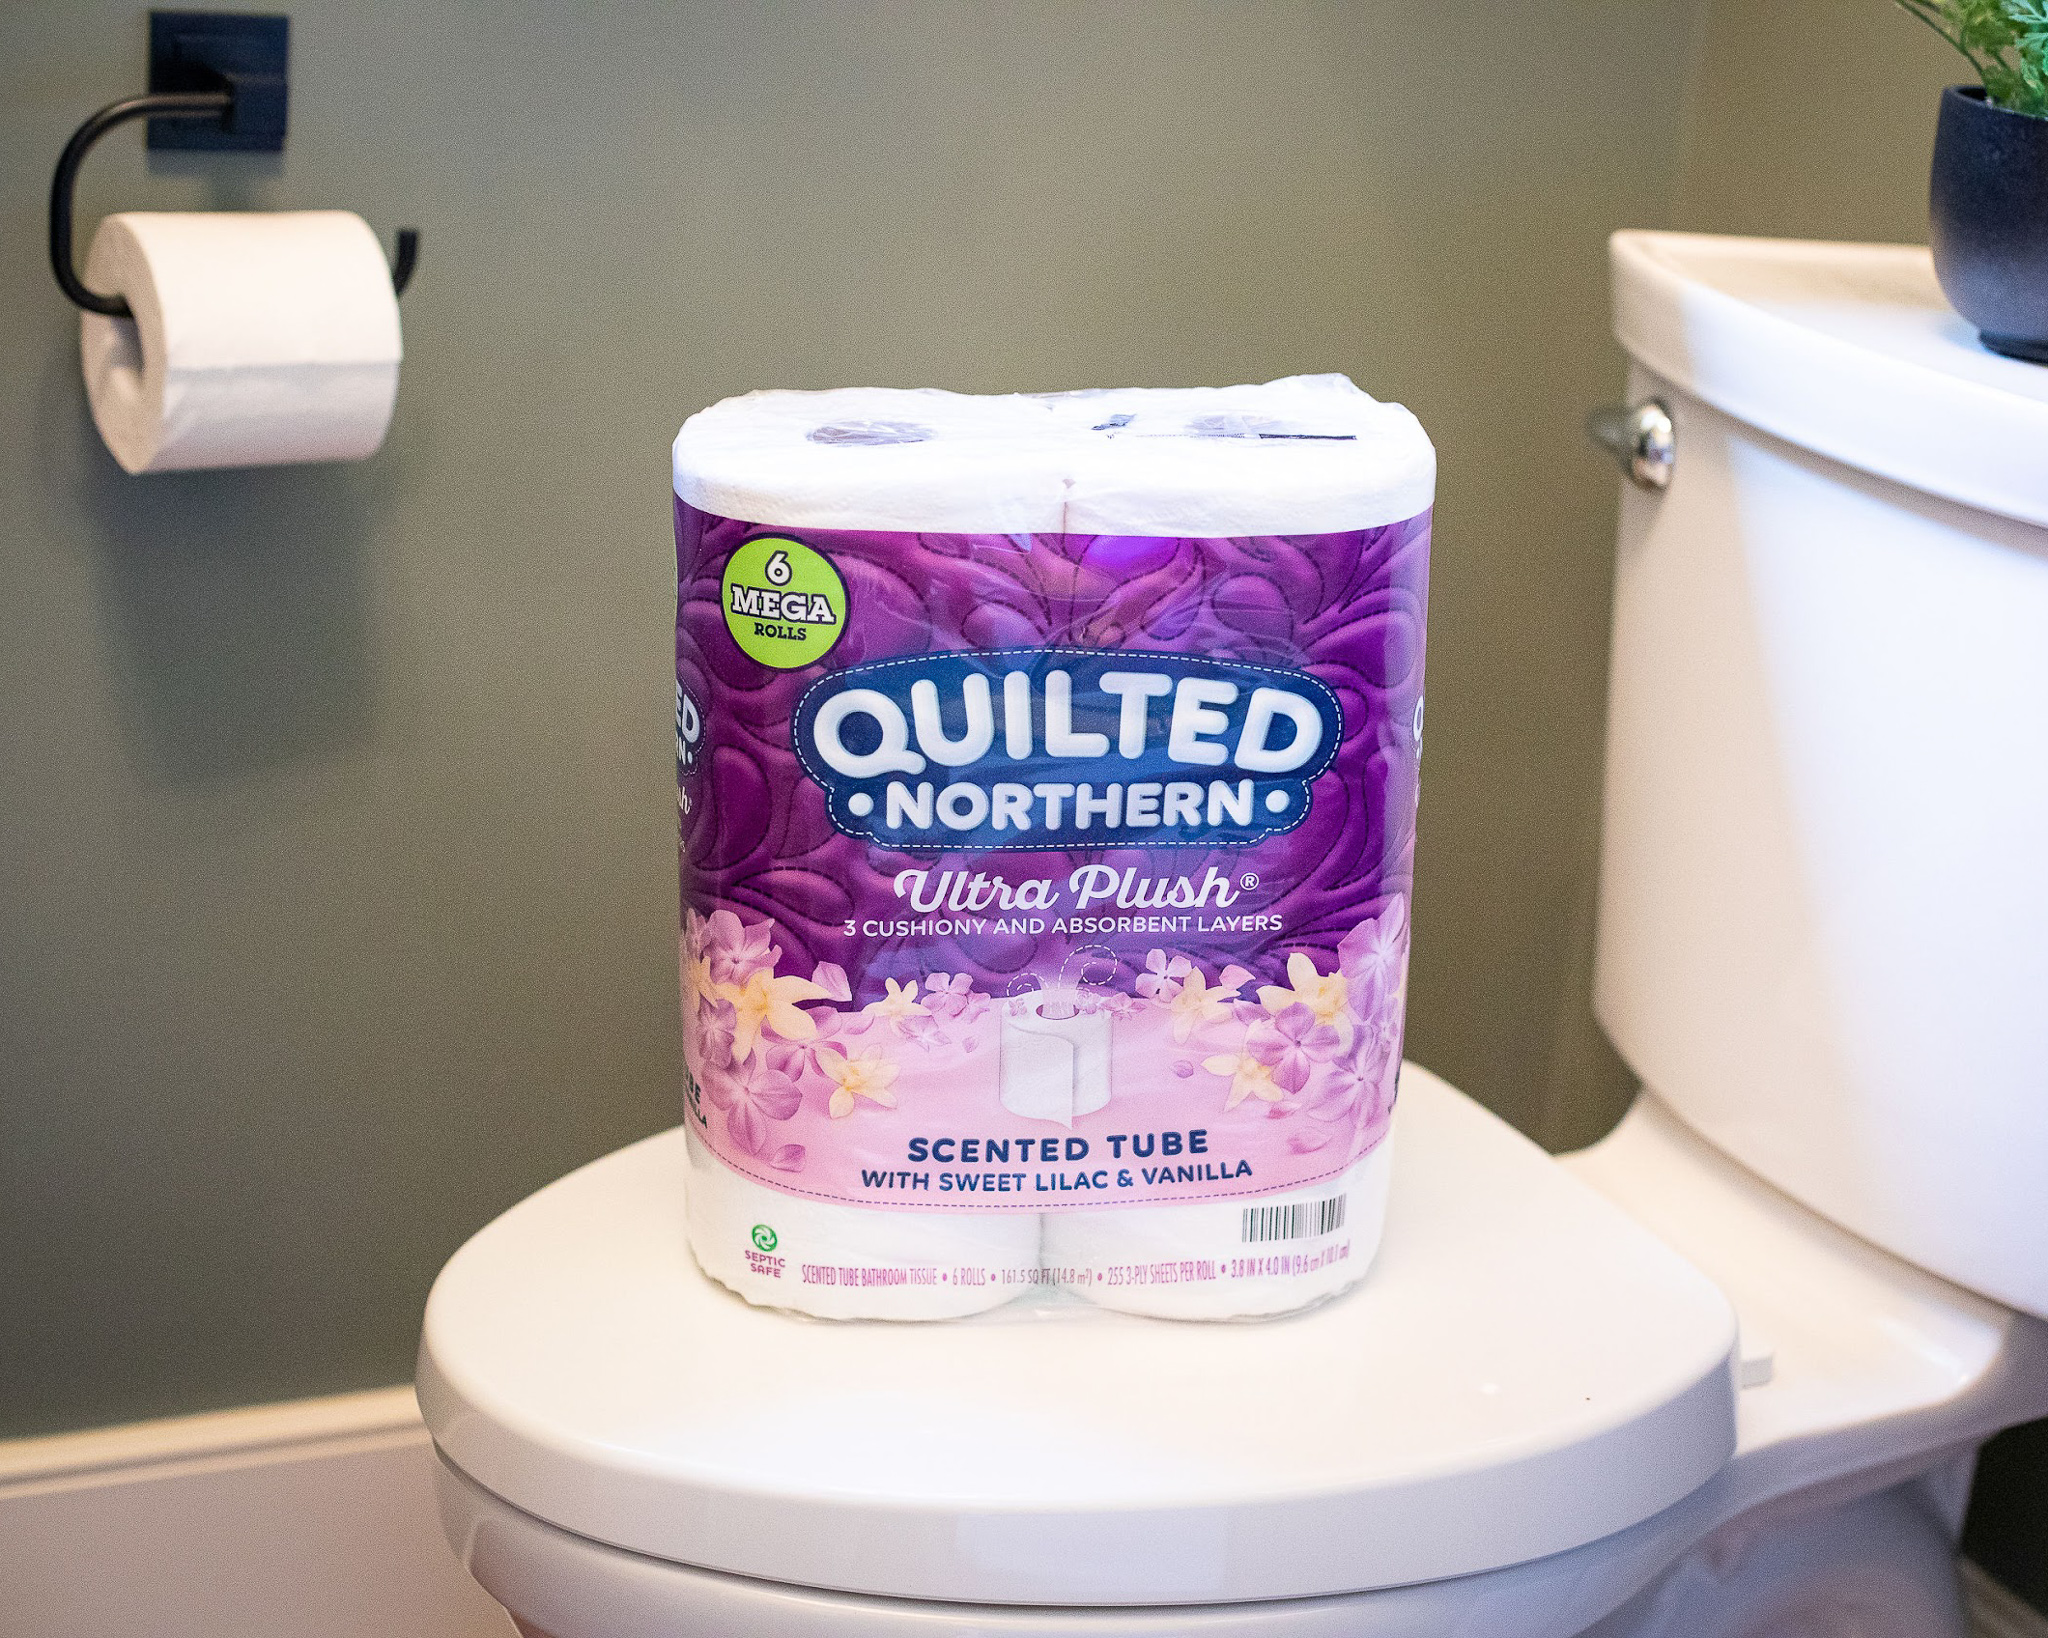 Quilted Northern Bathroom Tissue Just $4.99 At Publix (Regular Price $9.99)